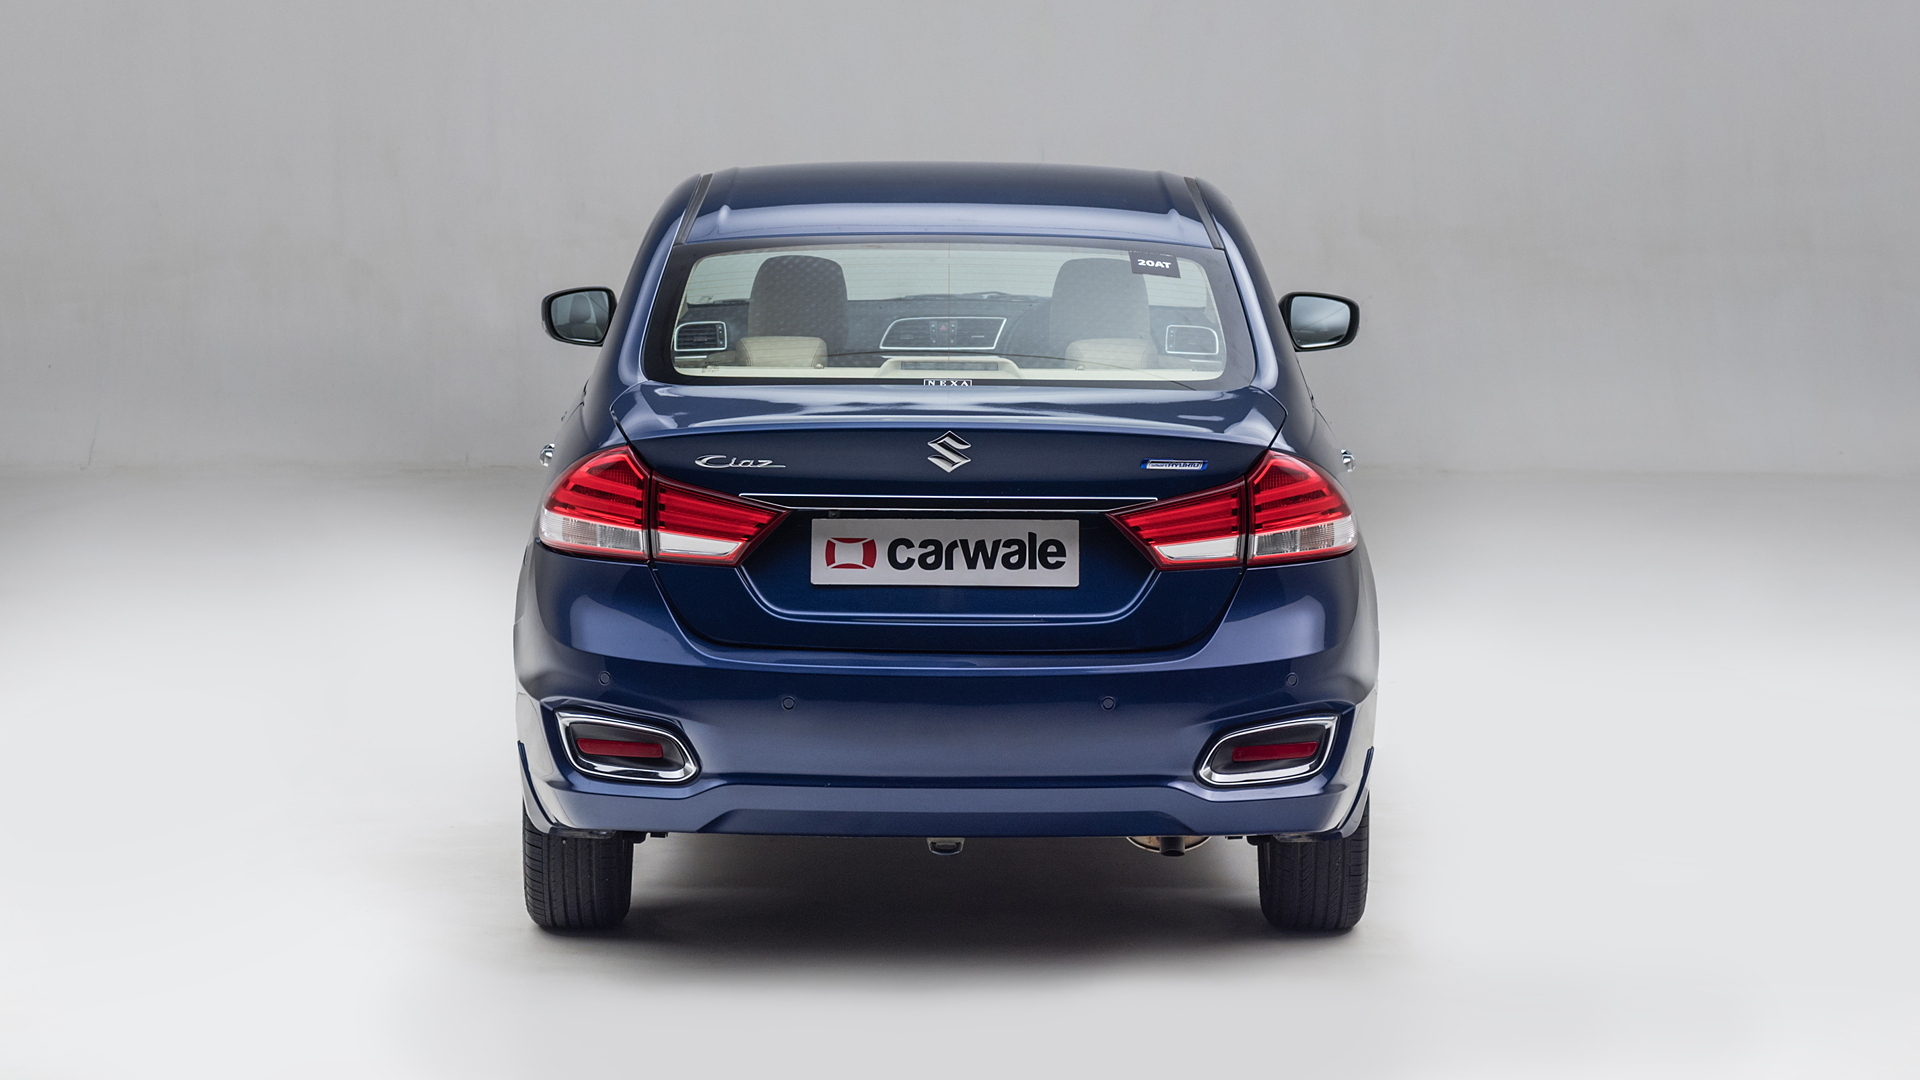 Maruti Ciaz S 1 5 Mt Price In India Features Specs And Reviews Carwale